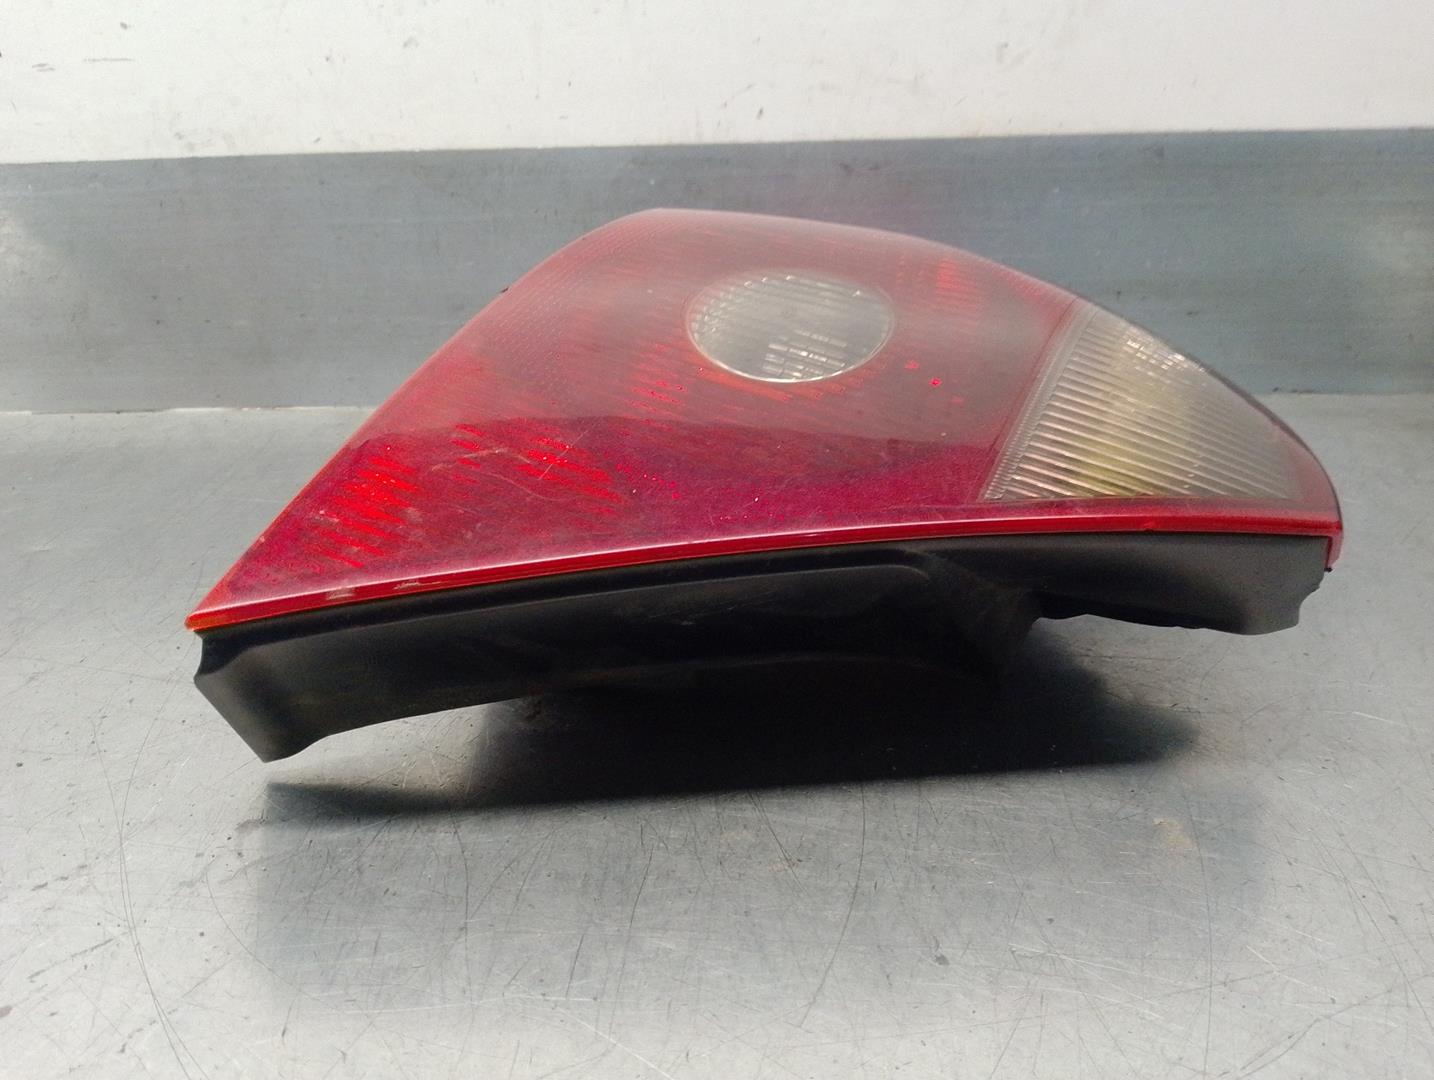 FORD Mondeo 3 generation (2000-2007) Rear Left Taillight 1S7113405A, 5PUERTAS 24578346